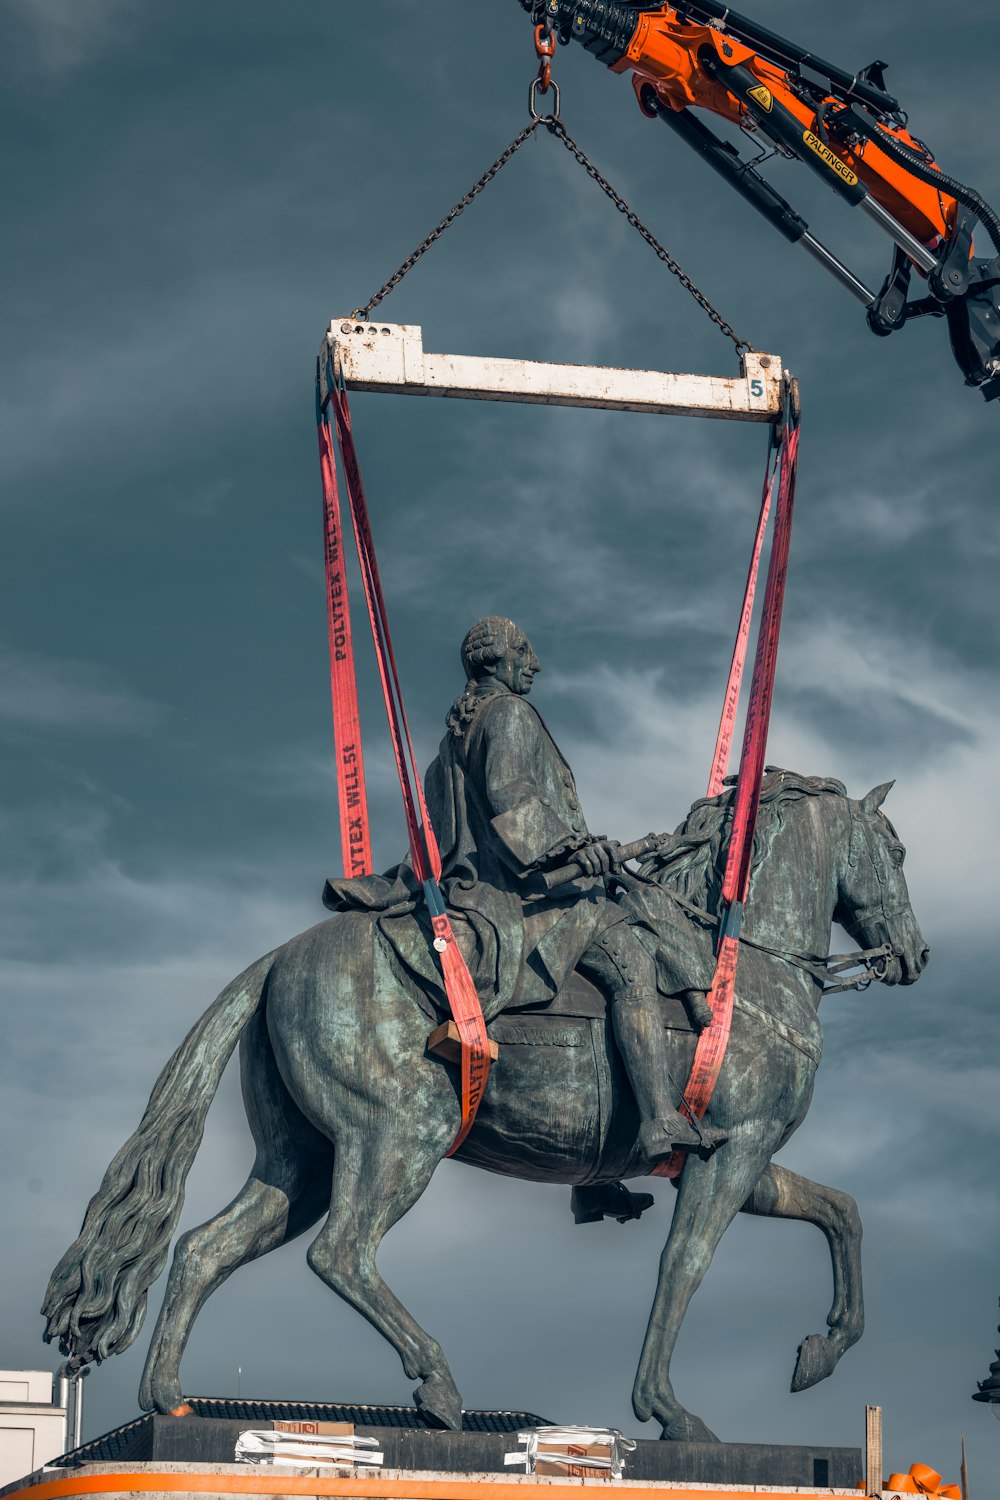 a statue of a man on a horse being lifted by a crane